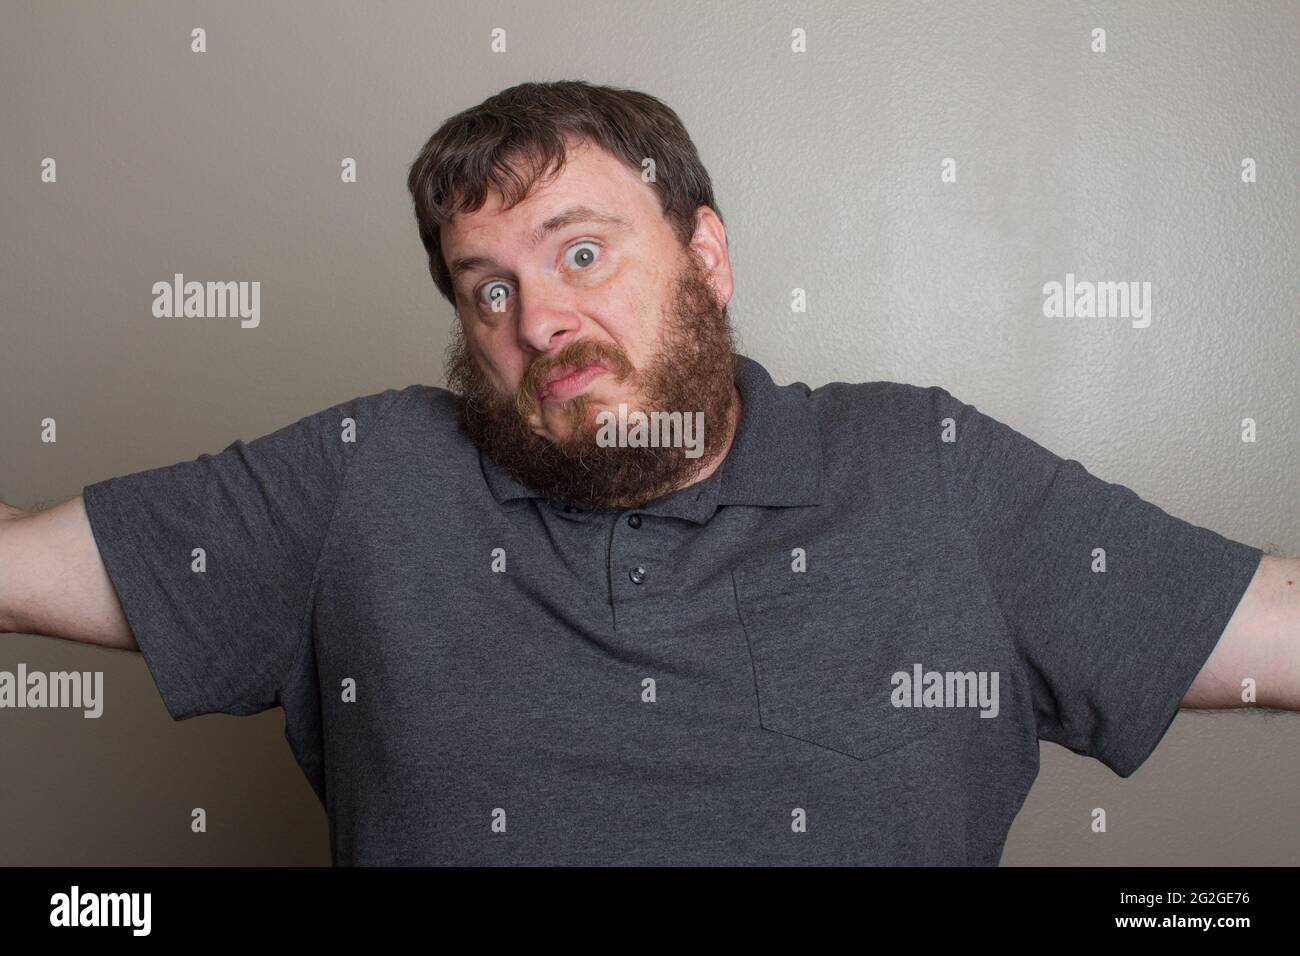 Man who could care less shrugging his shoulders Stock Photo